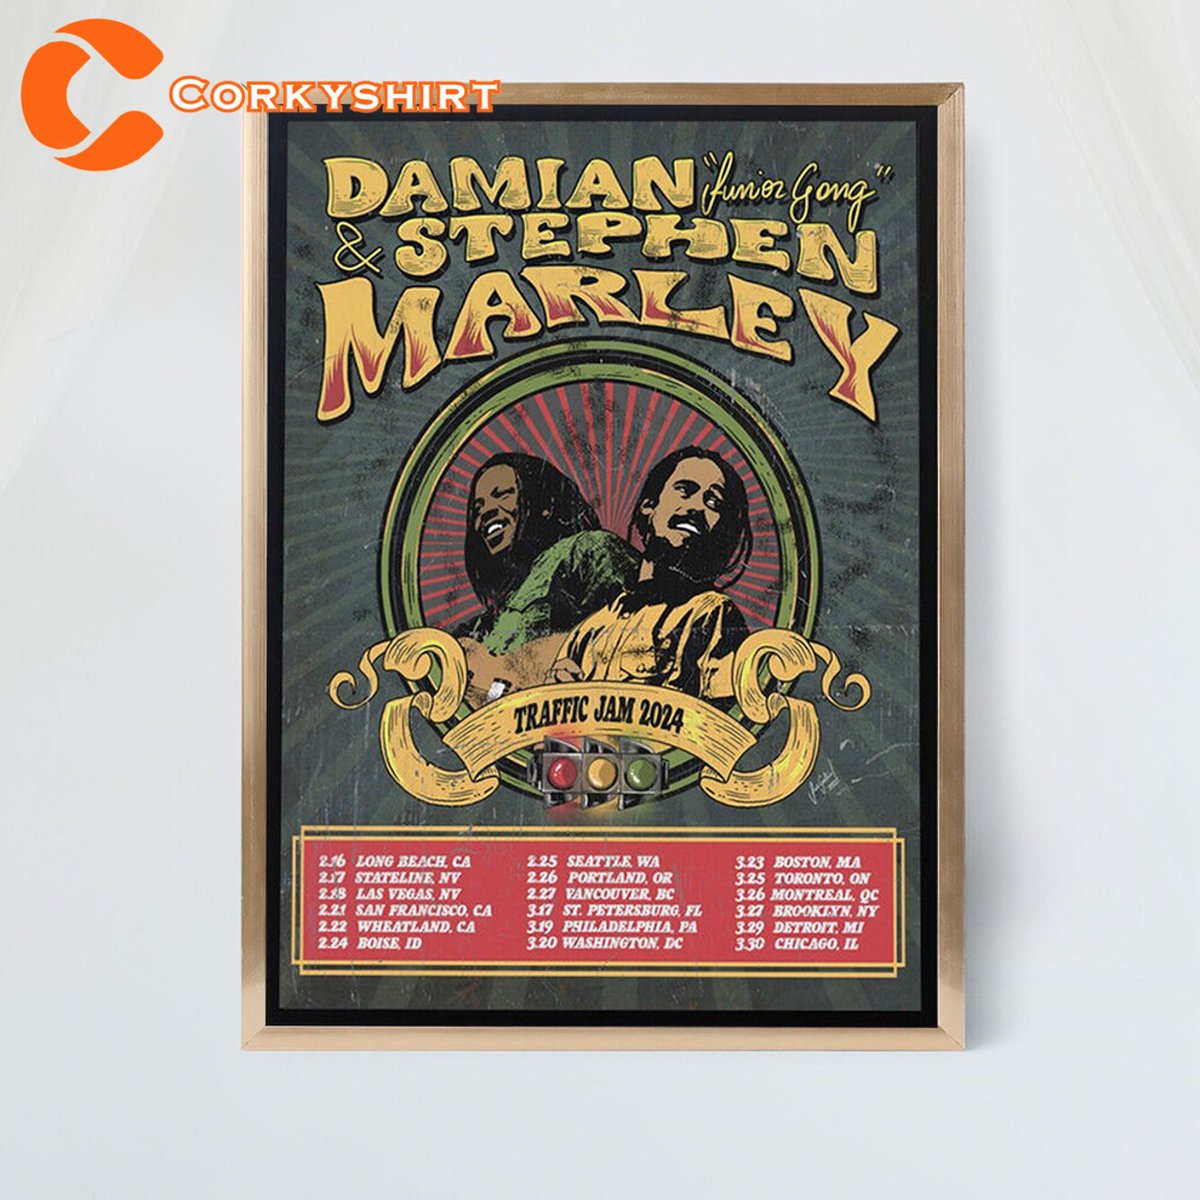 Witness Damian Marley and Stephen Marley on Traffic Jam Tour 2024 with Traffic Jam Marley Brothers Tour Poster. Enjoy unforgettable music journey!
corkyshirt.com/traffic-jam-ma…
#Music #DamianMarley #StephenMarley #TrafficJamTour #Corkyshirt